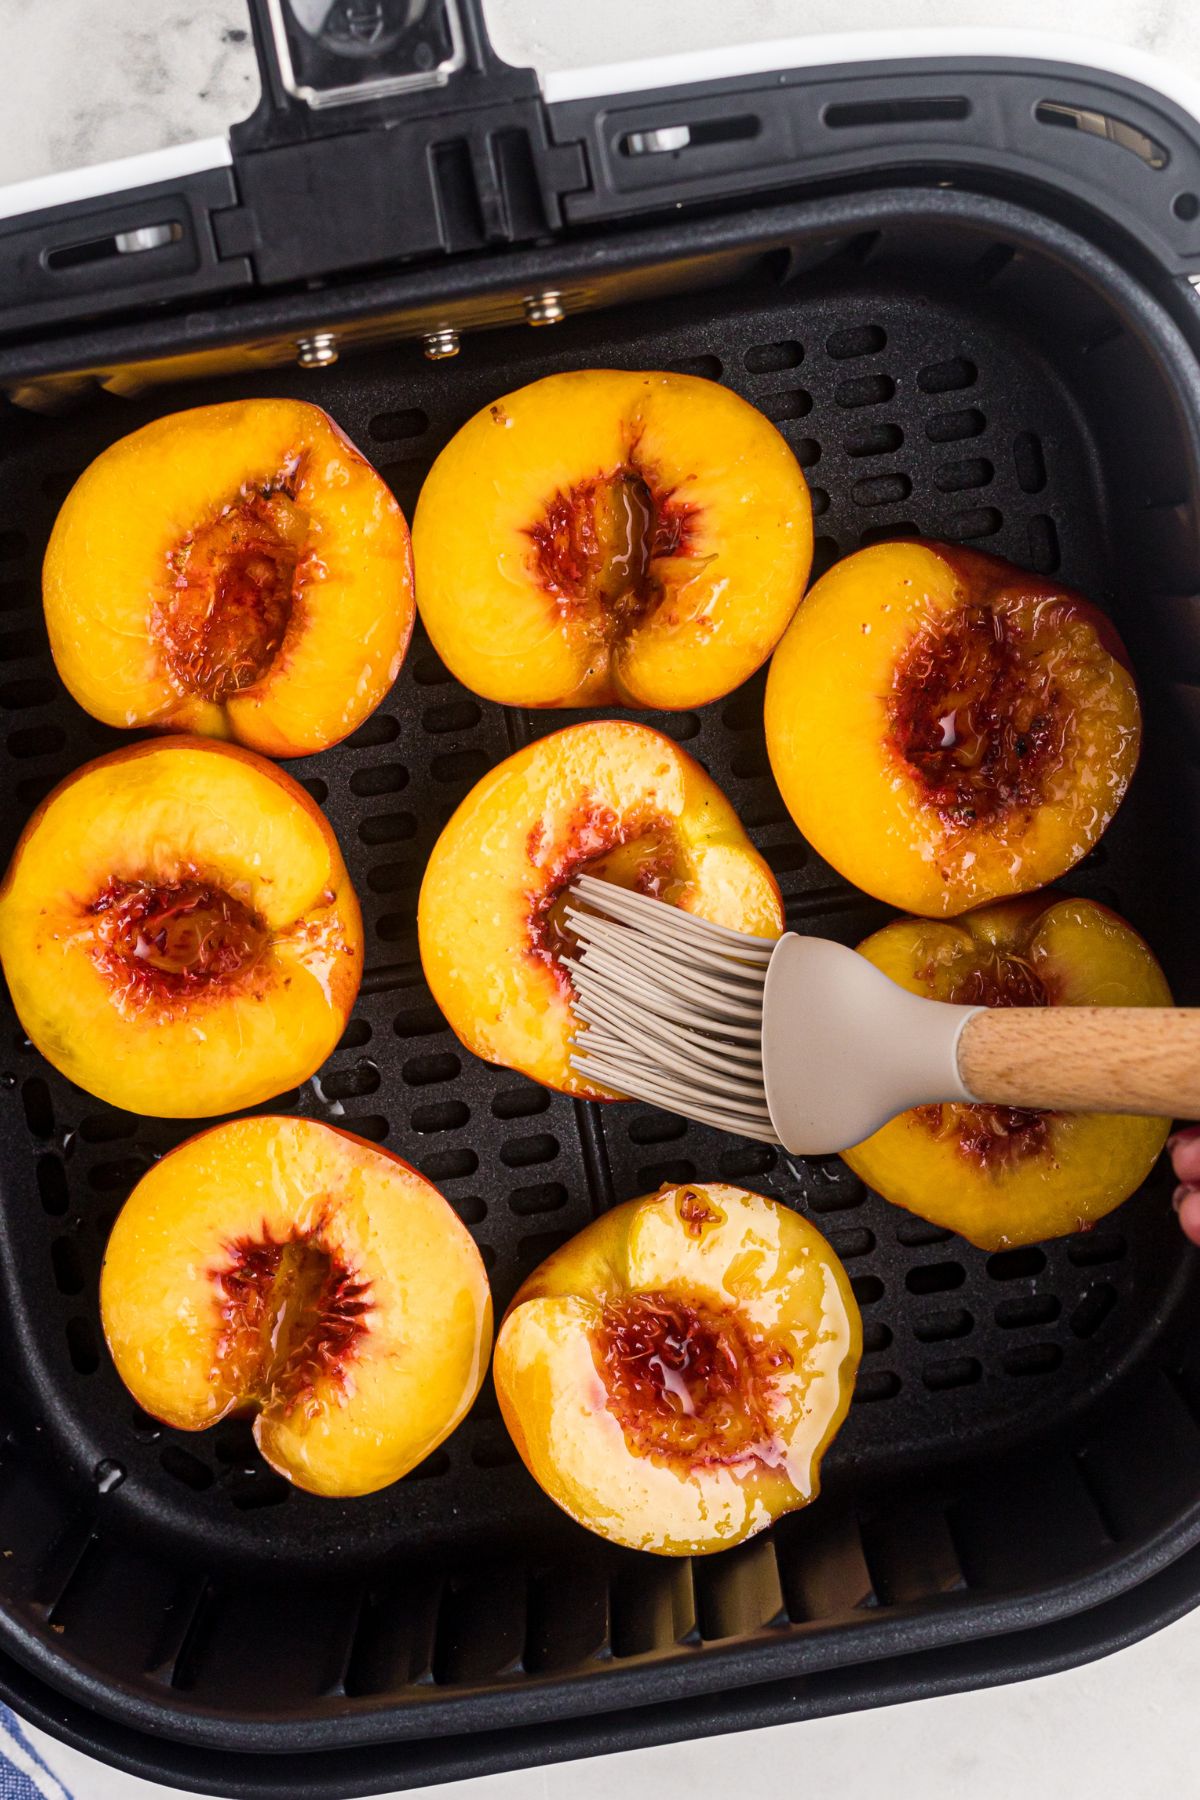 Golden yellow peaches being brushed with coconut oil in the air fryer basket